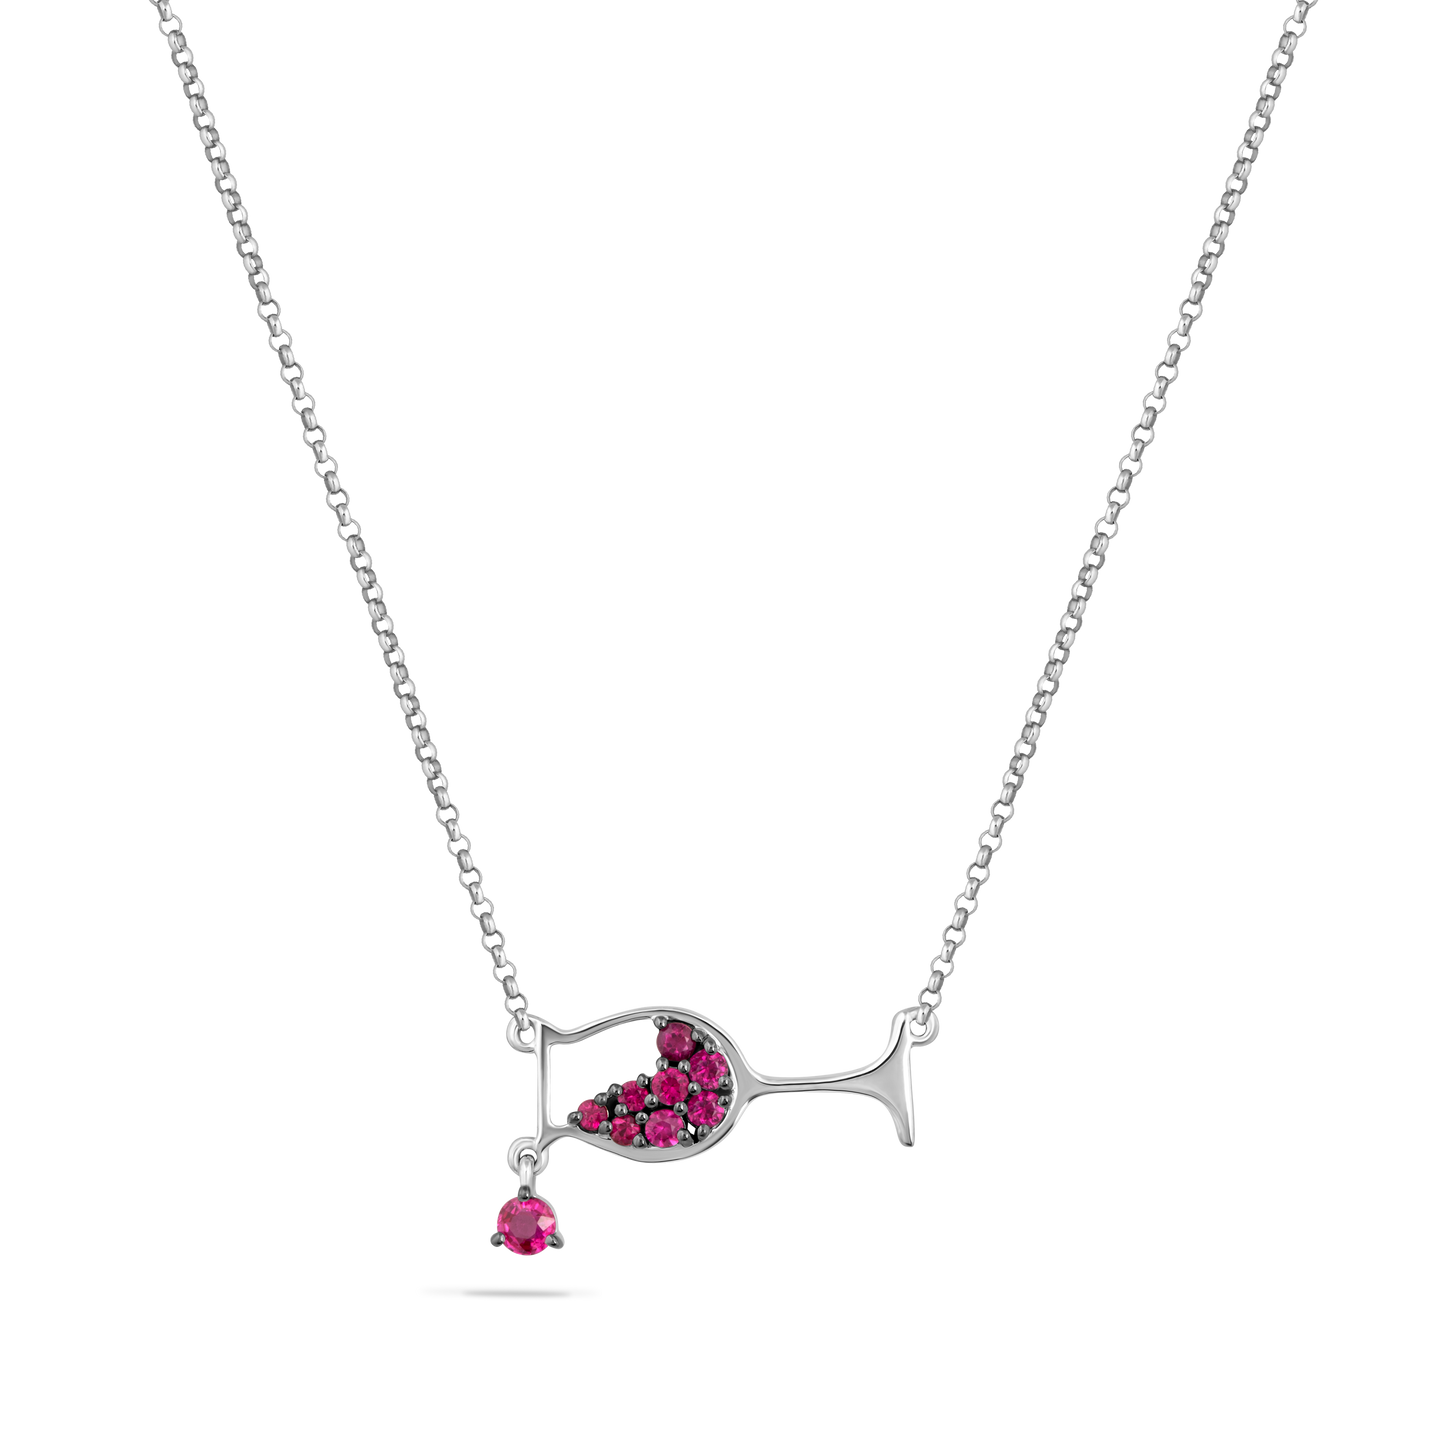 14K CHAMPAGNE GLASS NECKLACE WITH 9 PINK SAPPHIRES 0.38CT ON 18 INCHES CHAIN